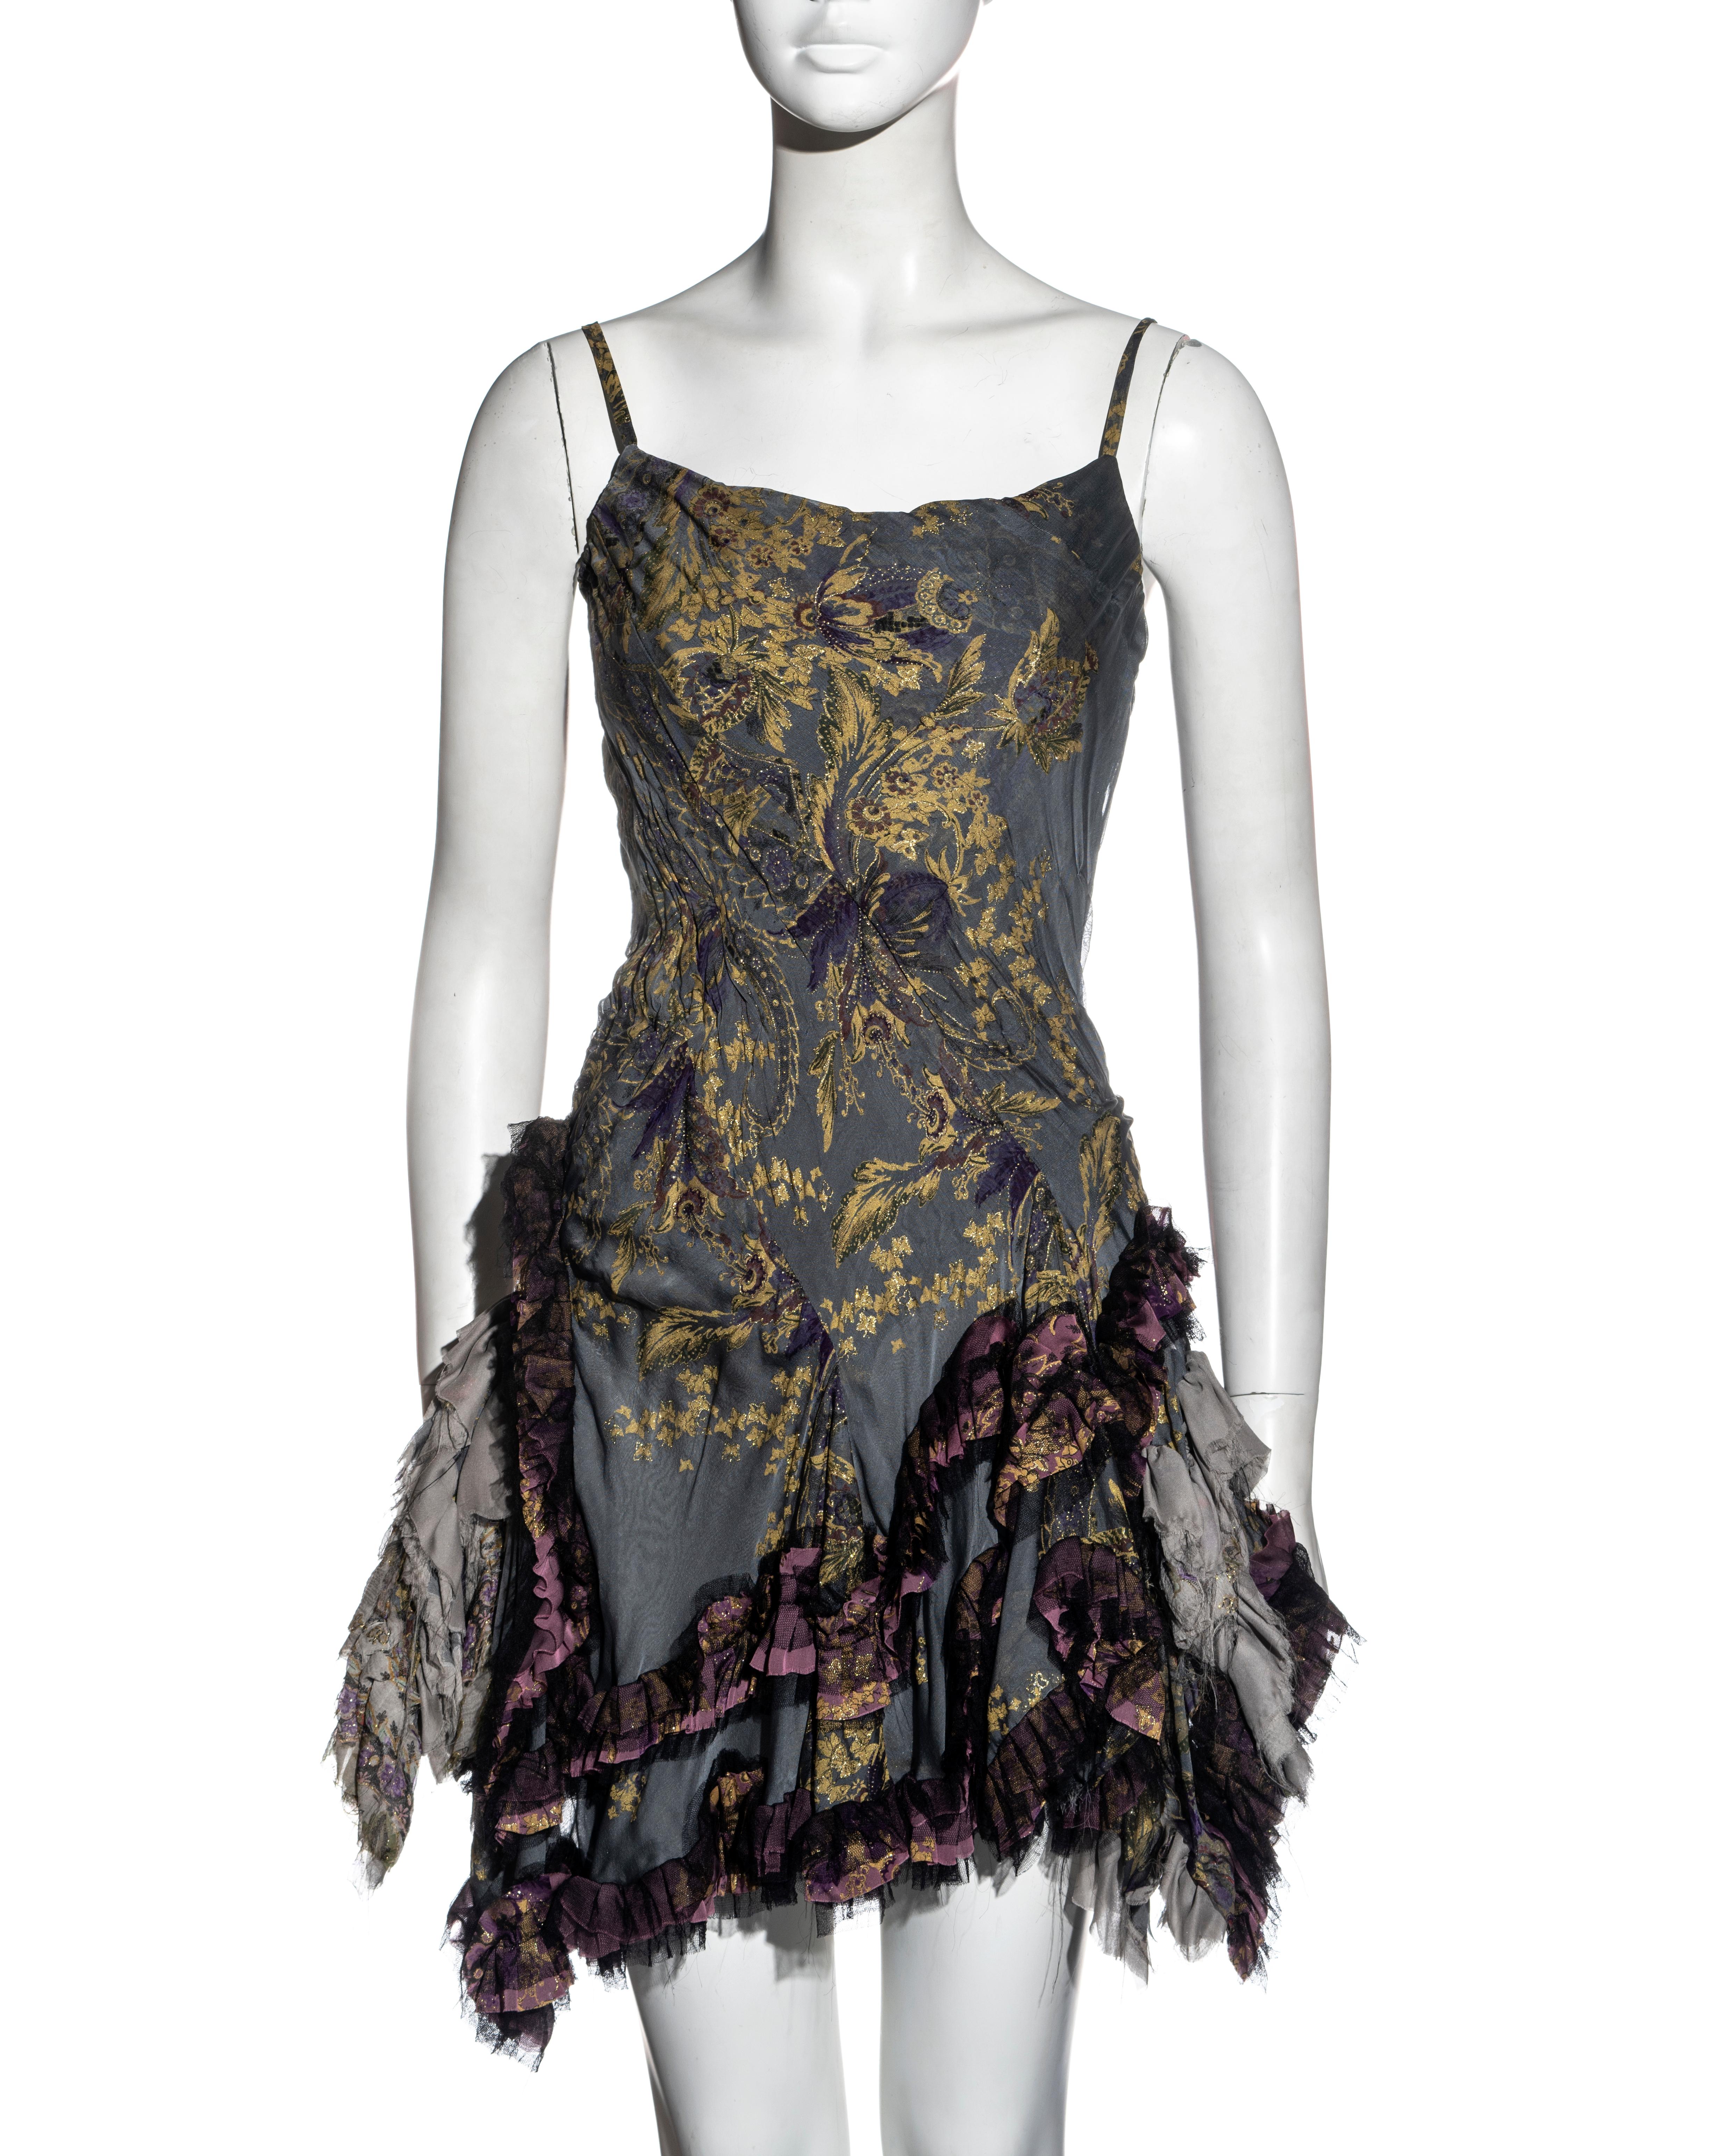 ▪ Roberto Cavalli silk corseted mini dress
▪ Blue-grey and metallic gold brocade printed silk 
▪ Corseted bodice with asymmetric ruching 
▪ Ruffled mini skirt with frayed hem 
▪ Corset lace-up fastening at the back 
▪ Size Small
▪ Fall-Winter 2004
▪